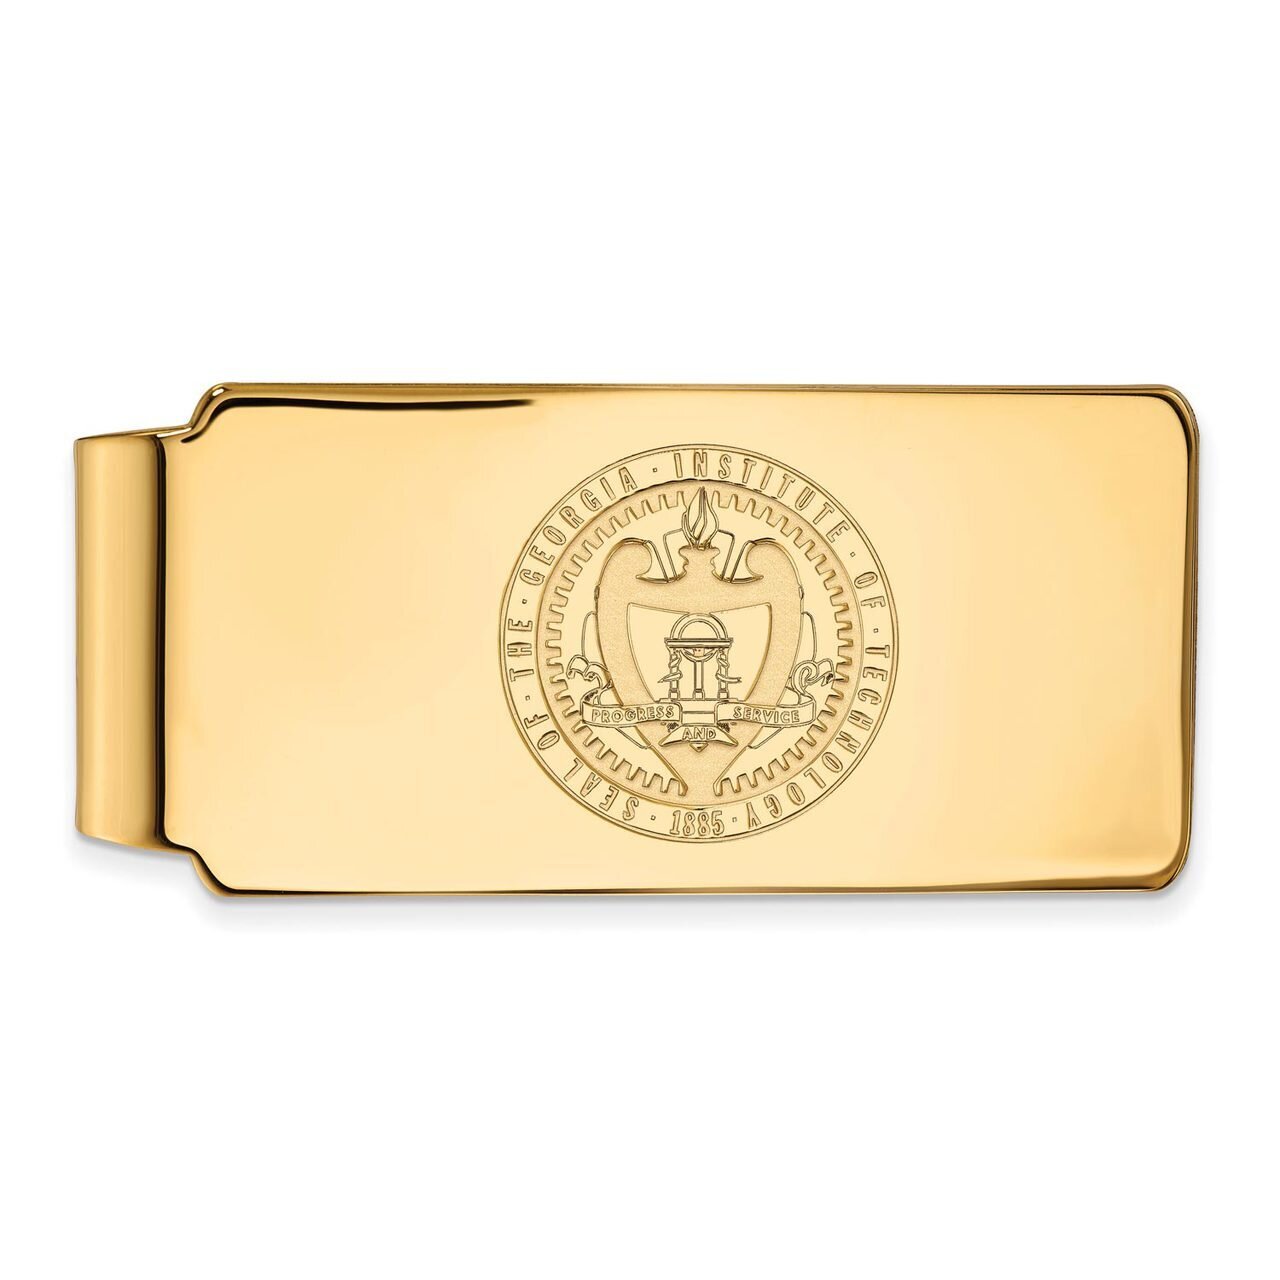 Georgia Institute of Technology Money Clip Crest 14k Yellow Gold 4Y059GT